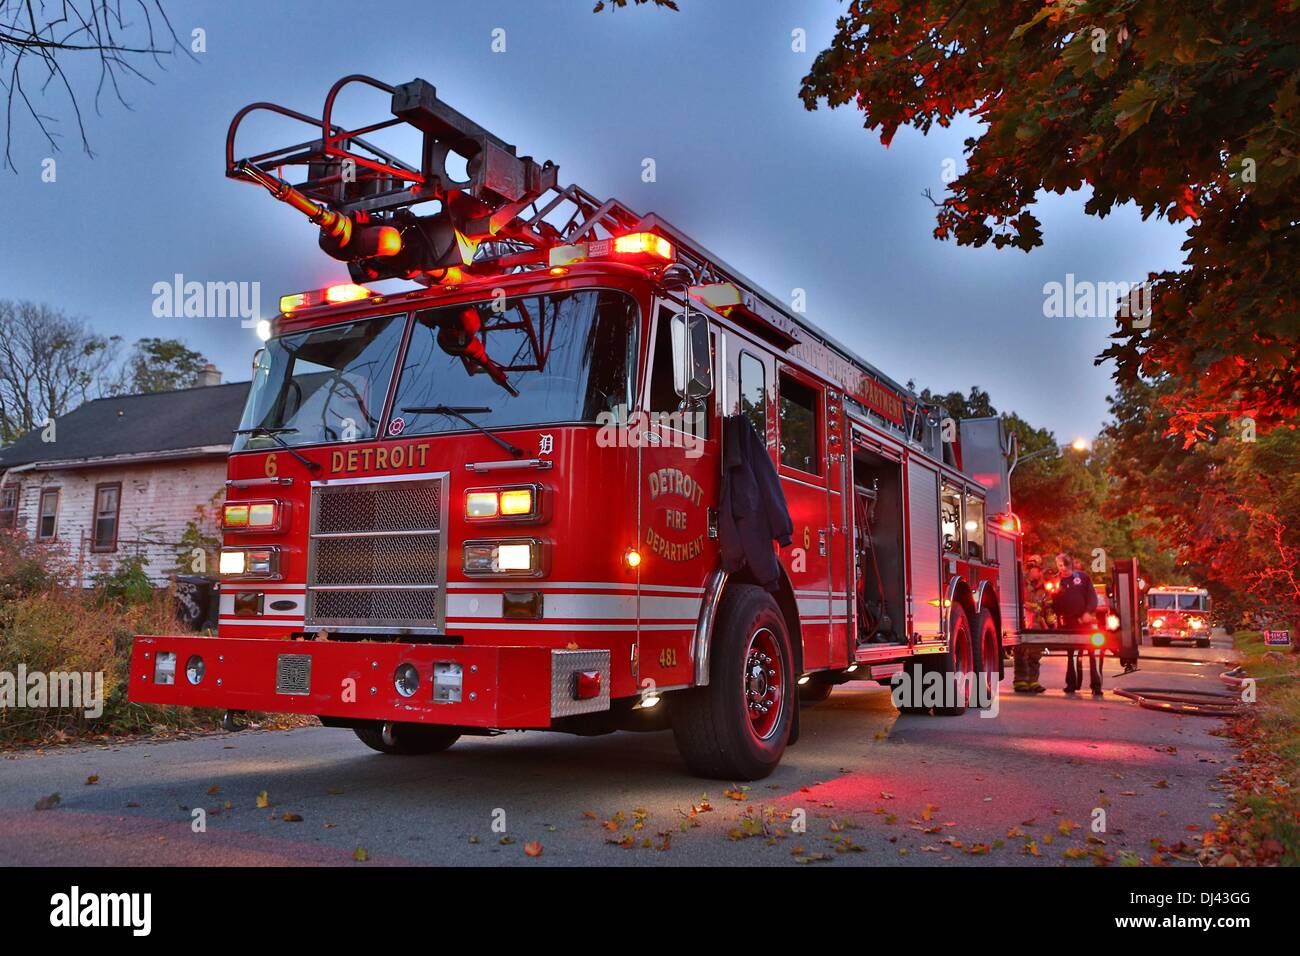 Engine Co's, Ladder Trucks and Fire Boat of Detroit Fire Department, Michigan, USA. Picture was taken in October 2013. Stock Photo